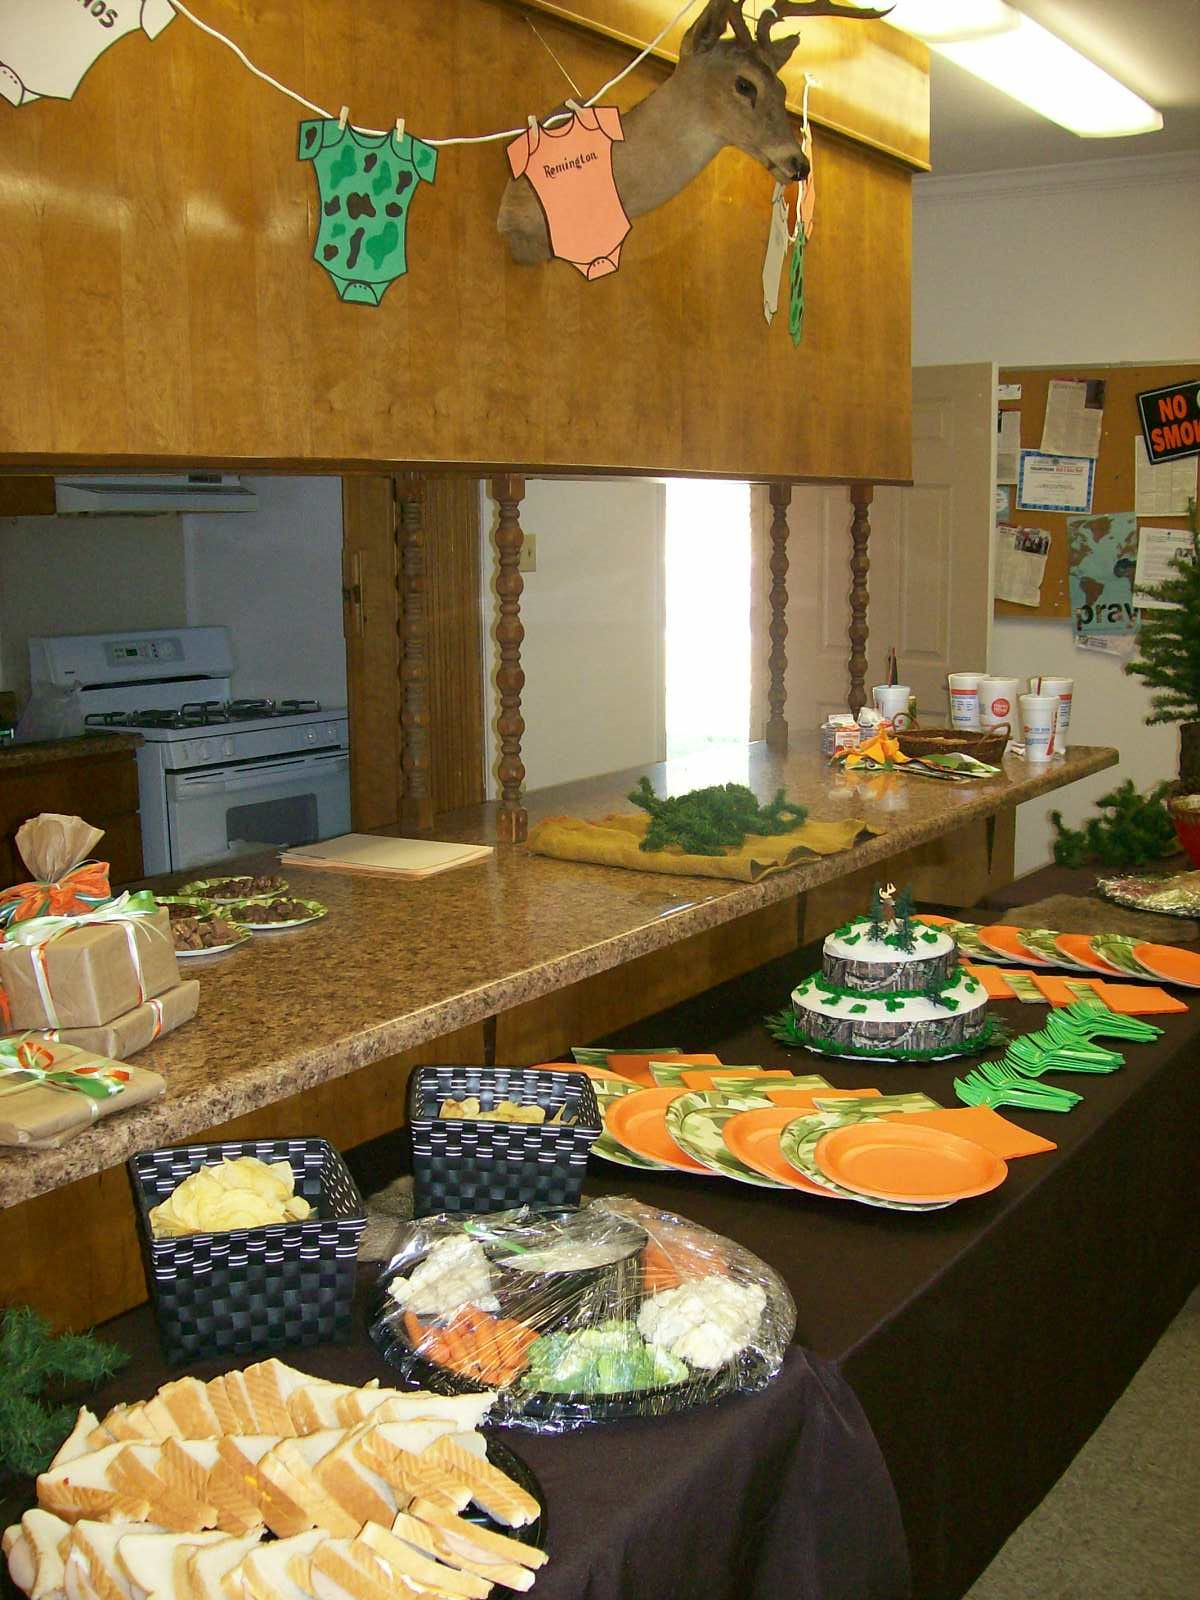 Camouflage Baby Shower Decorating Ideas
 Camo Baby Shower Food table decorations